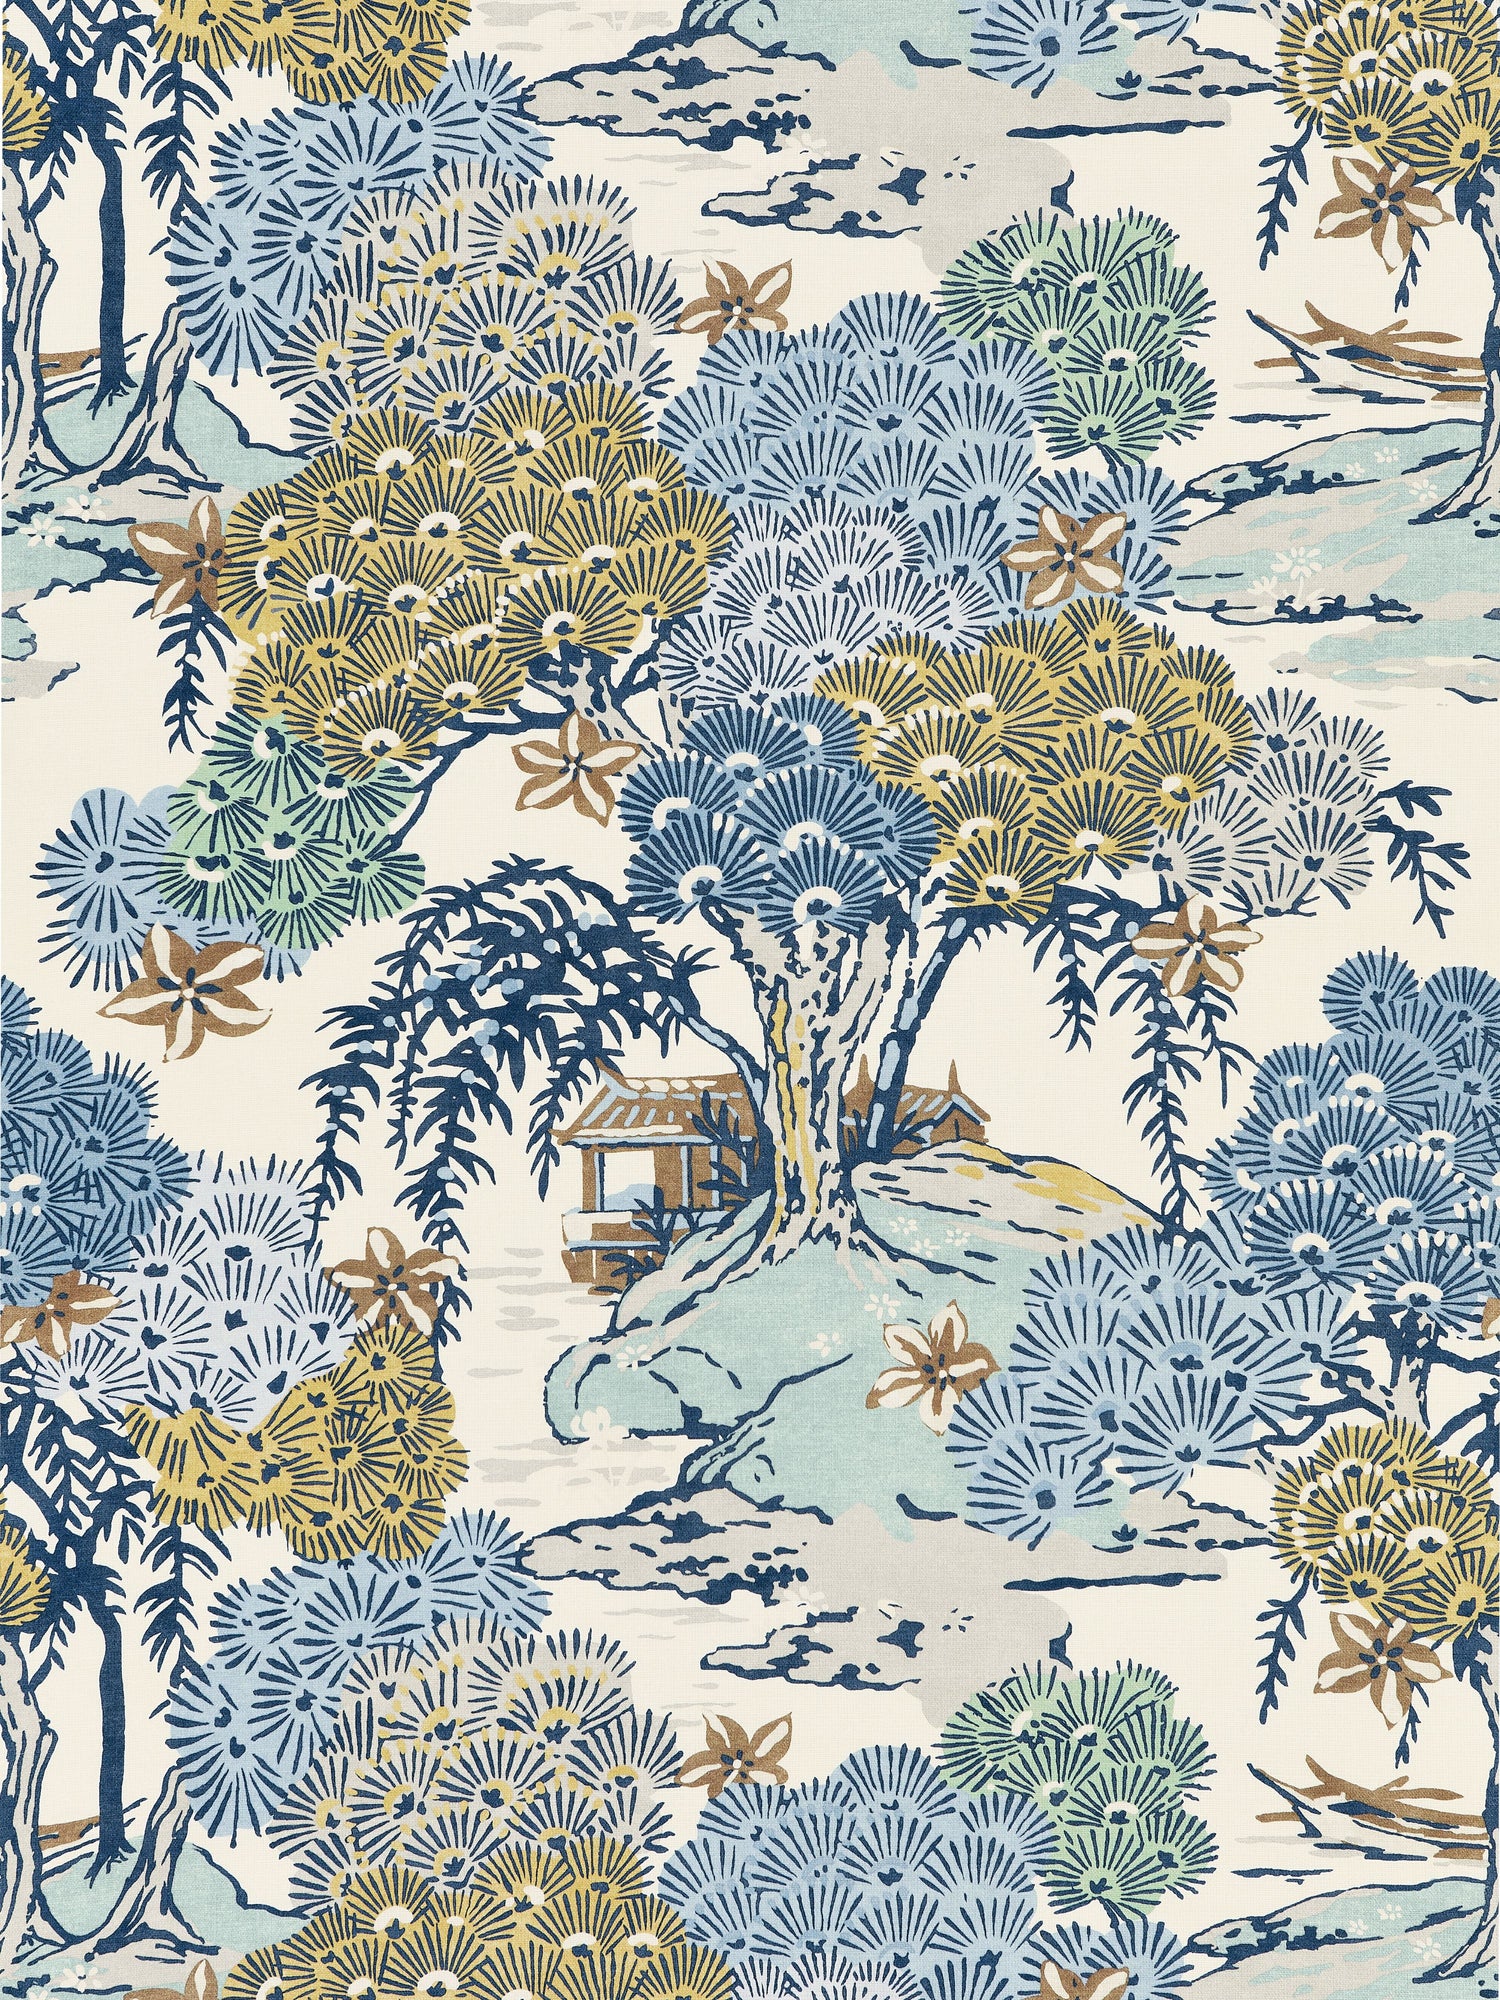 Sea Of Trees Print fabric in blue ridge color - pattern number SC 000216627 - by Scalamandre in the Scalamandre Fabrics Book 1 collection